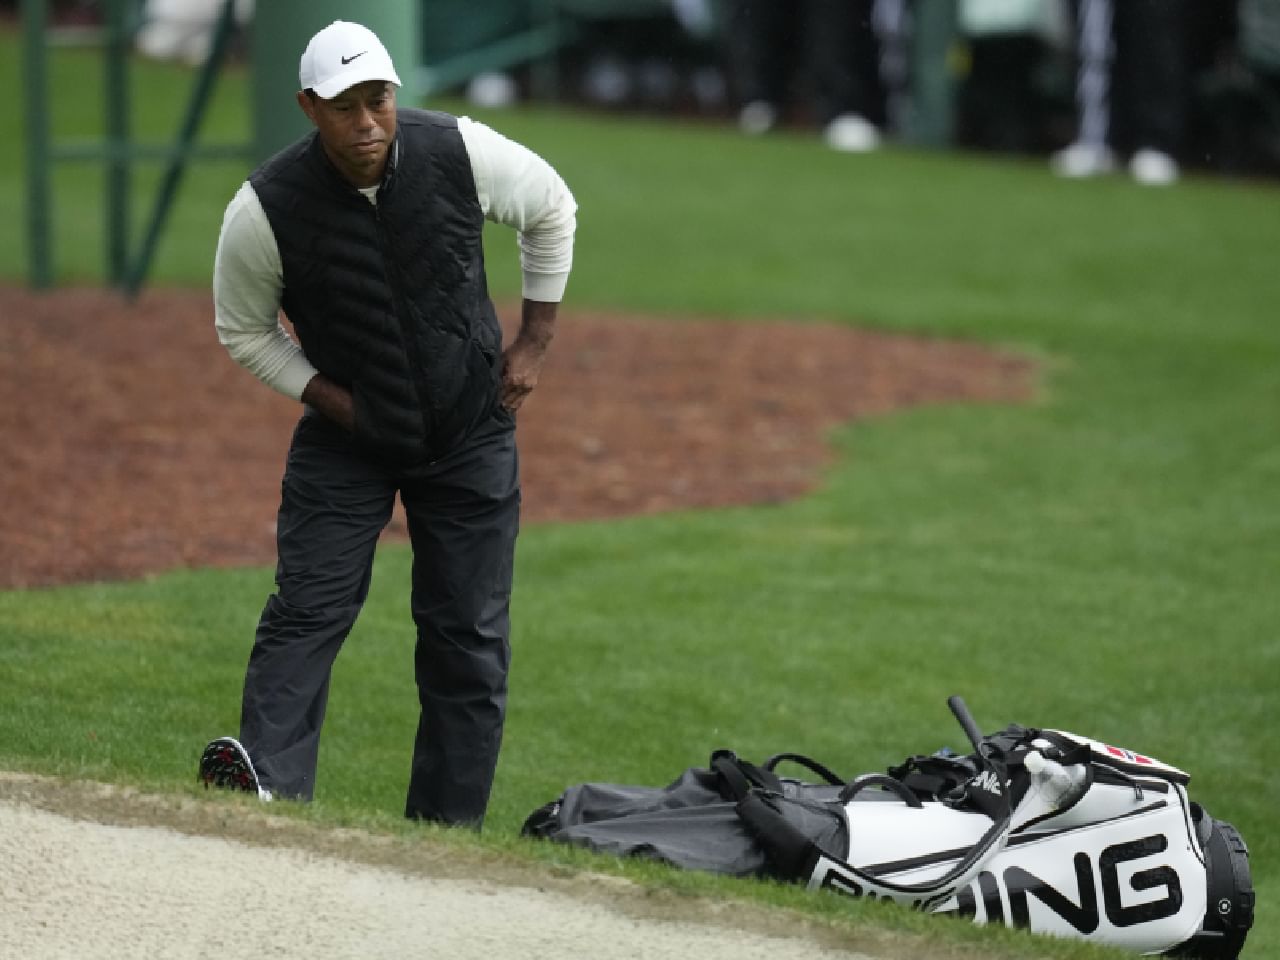 Tiger Woods to remain out of action for remainder of 2023 after undergoing ankle surgery